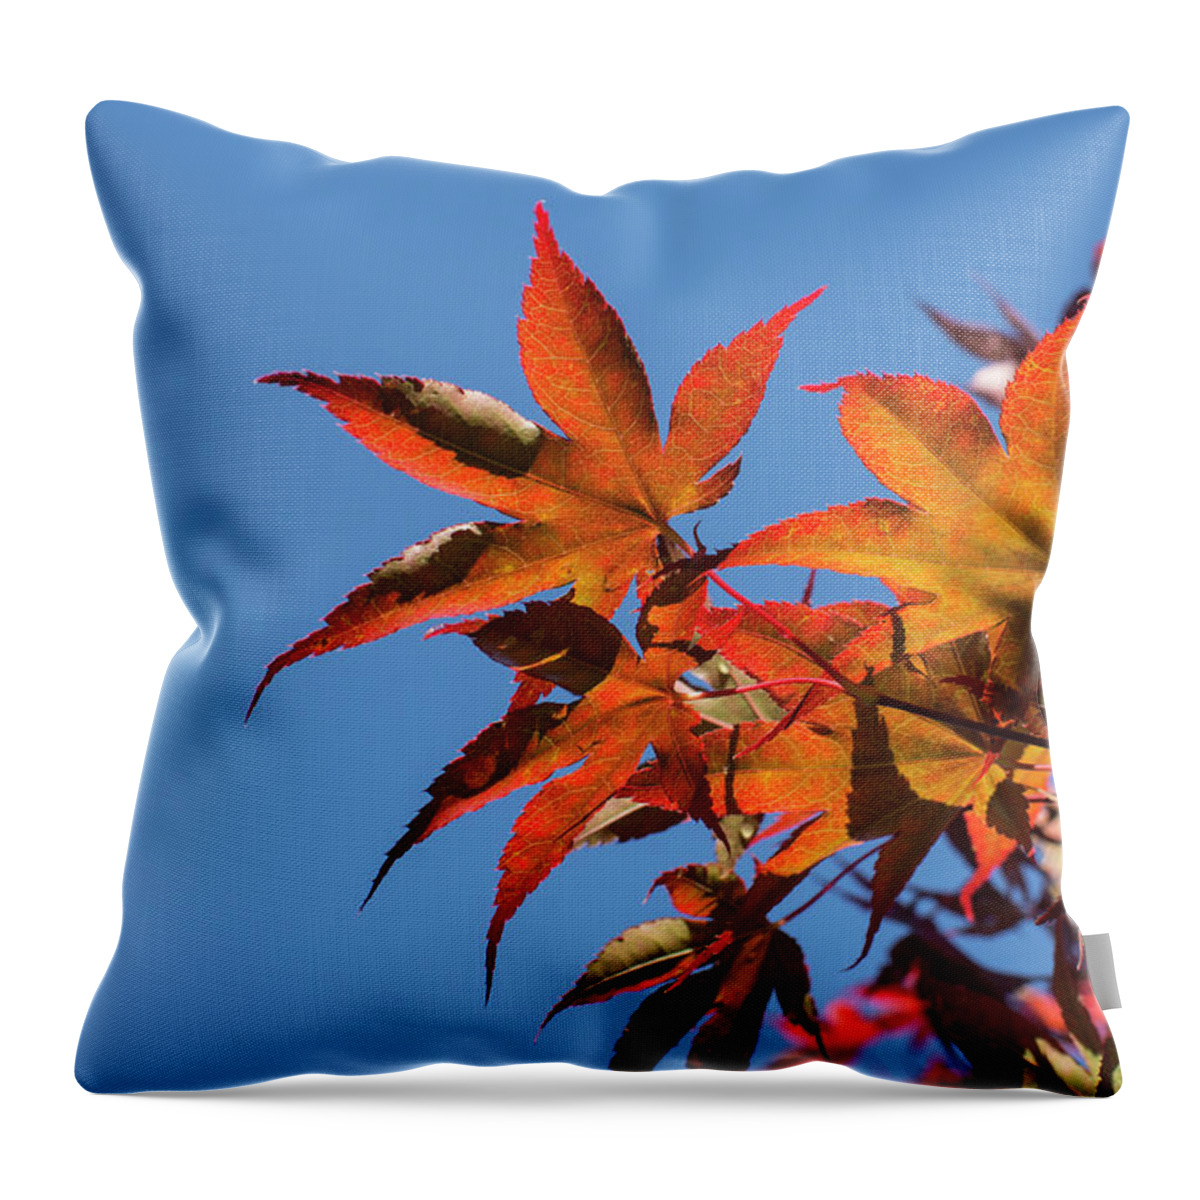 Autumn Throw Pillow featuring the photograph Autumn Leaves by Deborah Ritch